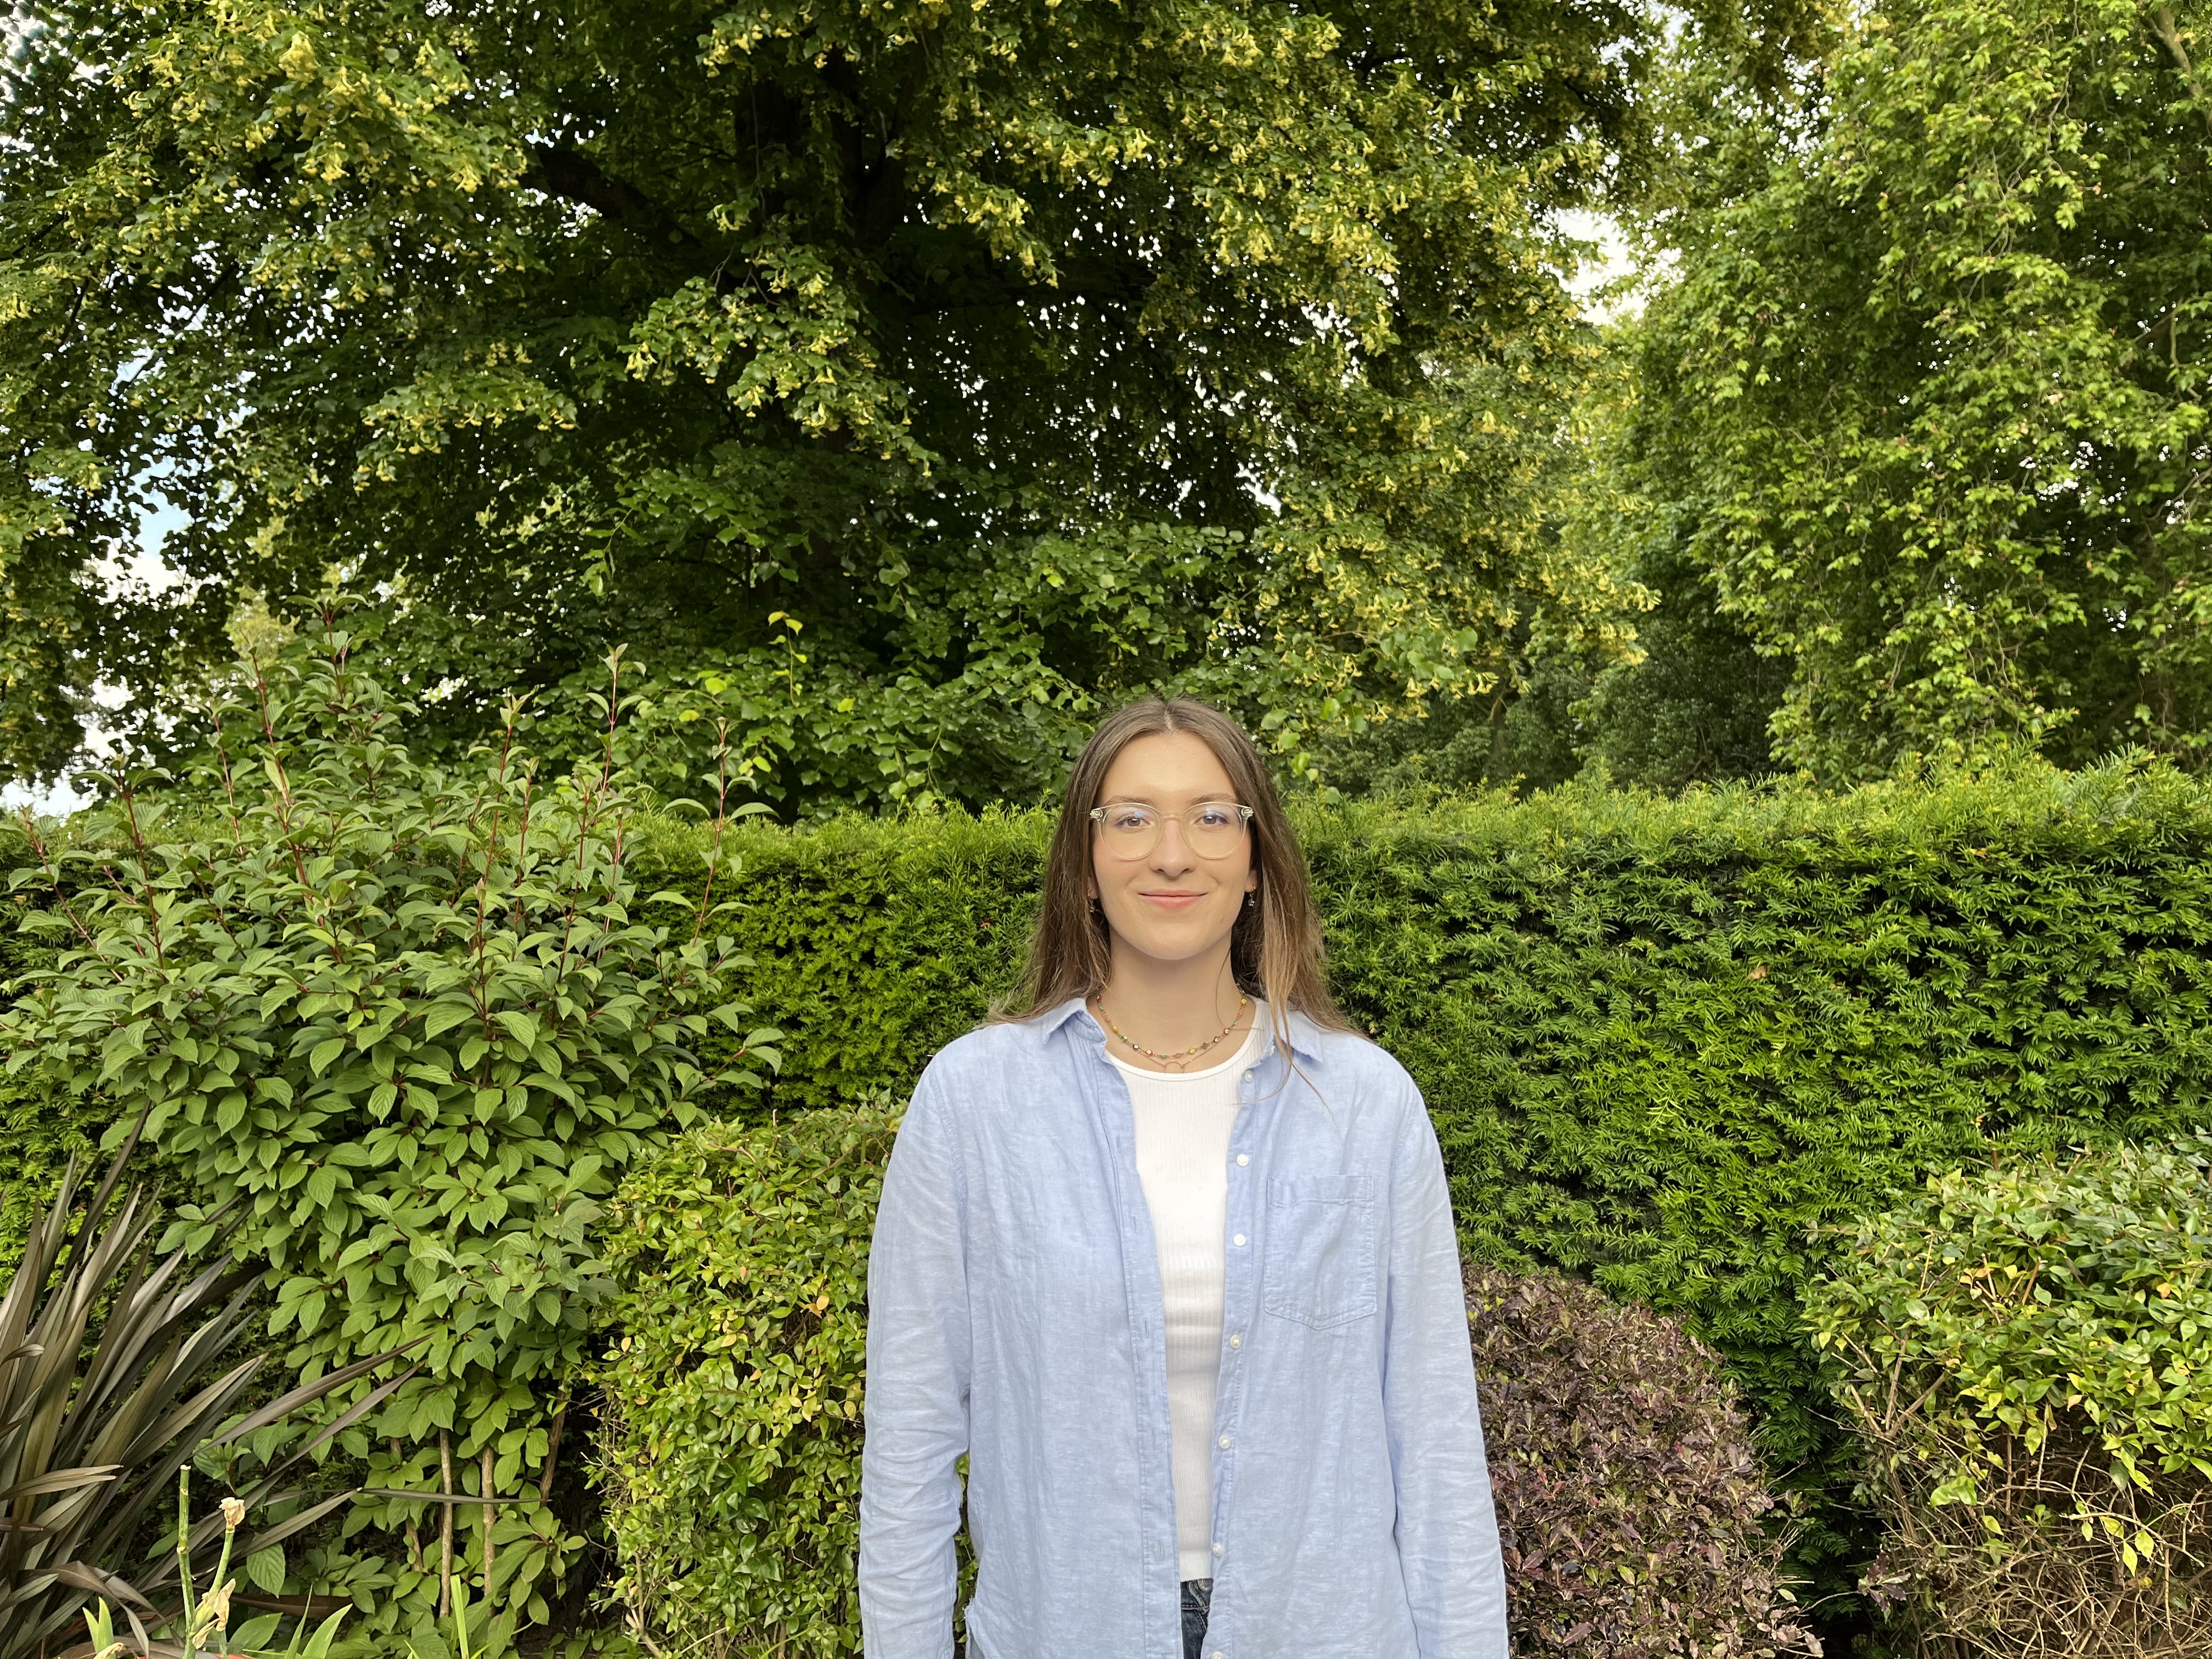 Profile photo of Alexandra wearing glasses and a white shirt with a light blue button down over the top, standing in front of a green hedge and trees